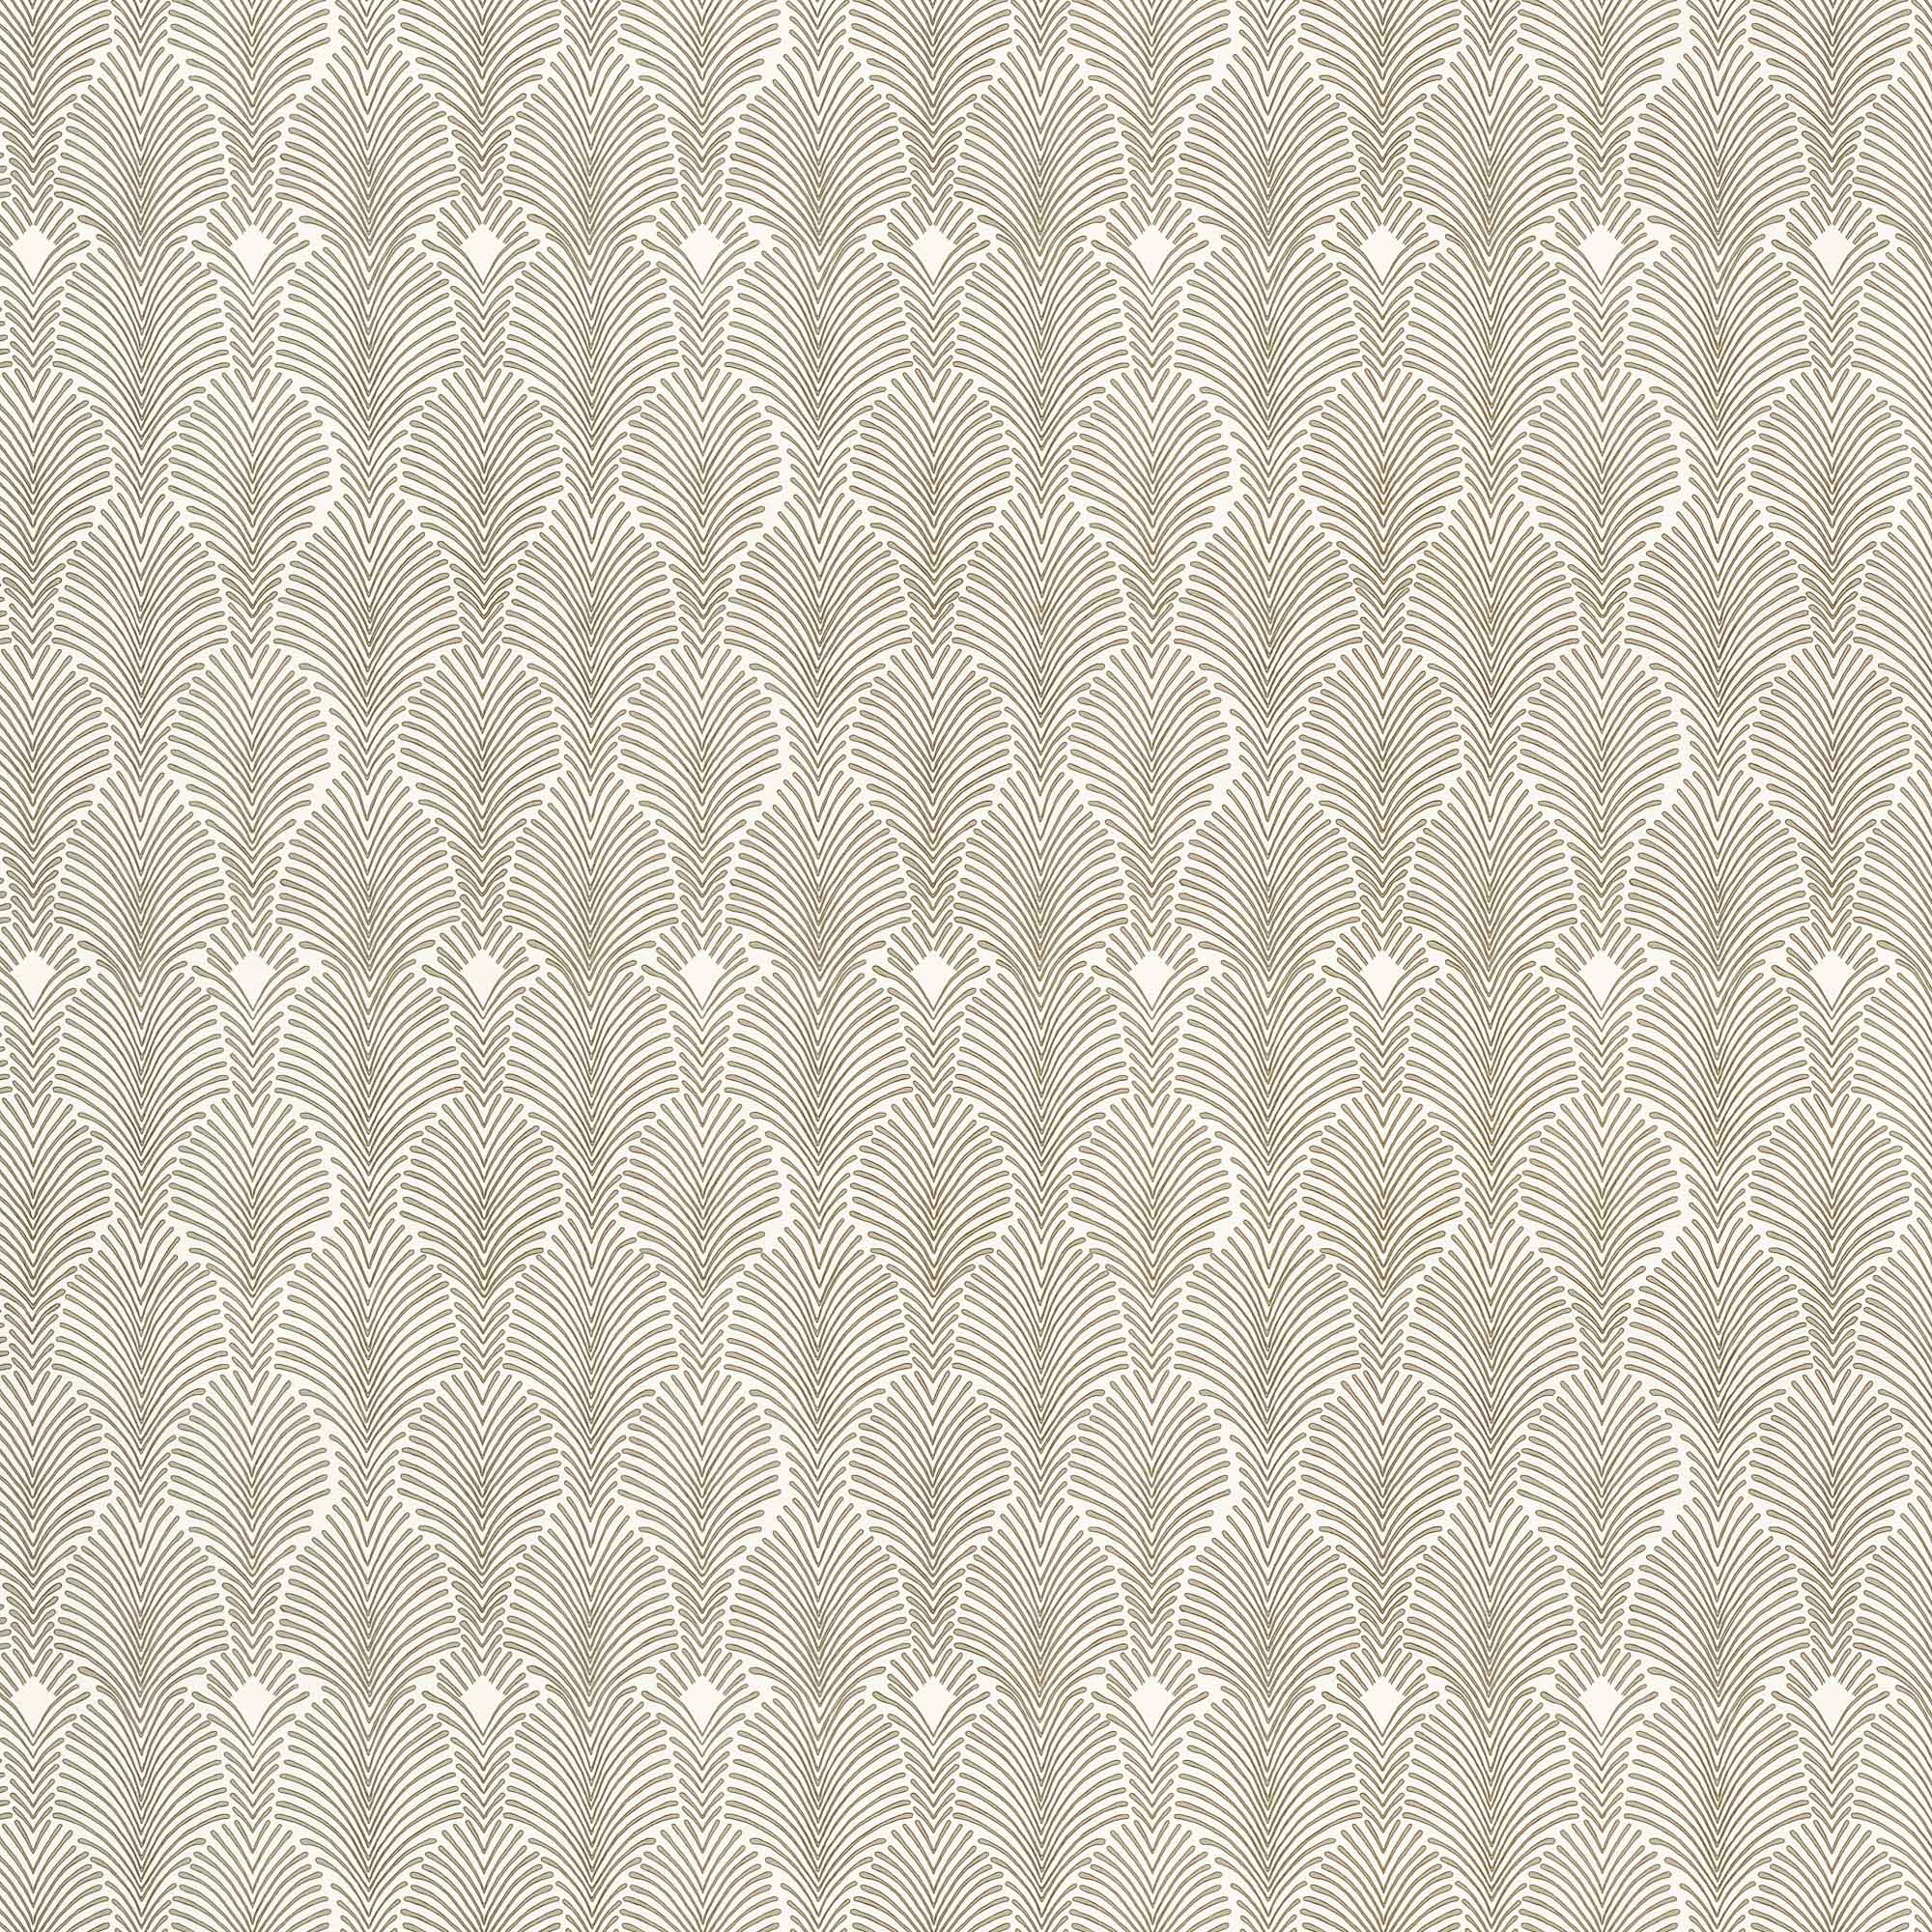 Detail of wallpaper in an art deco damask print in tan on a white field.